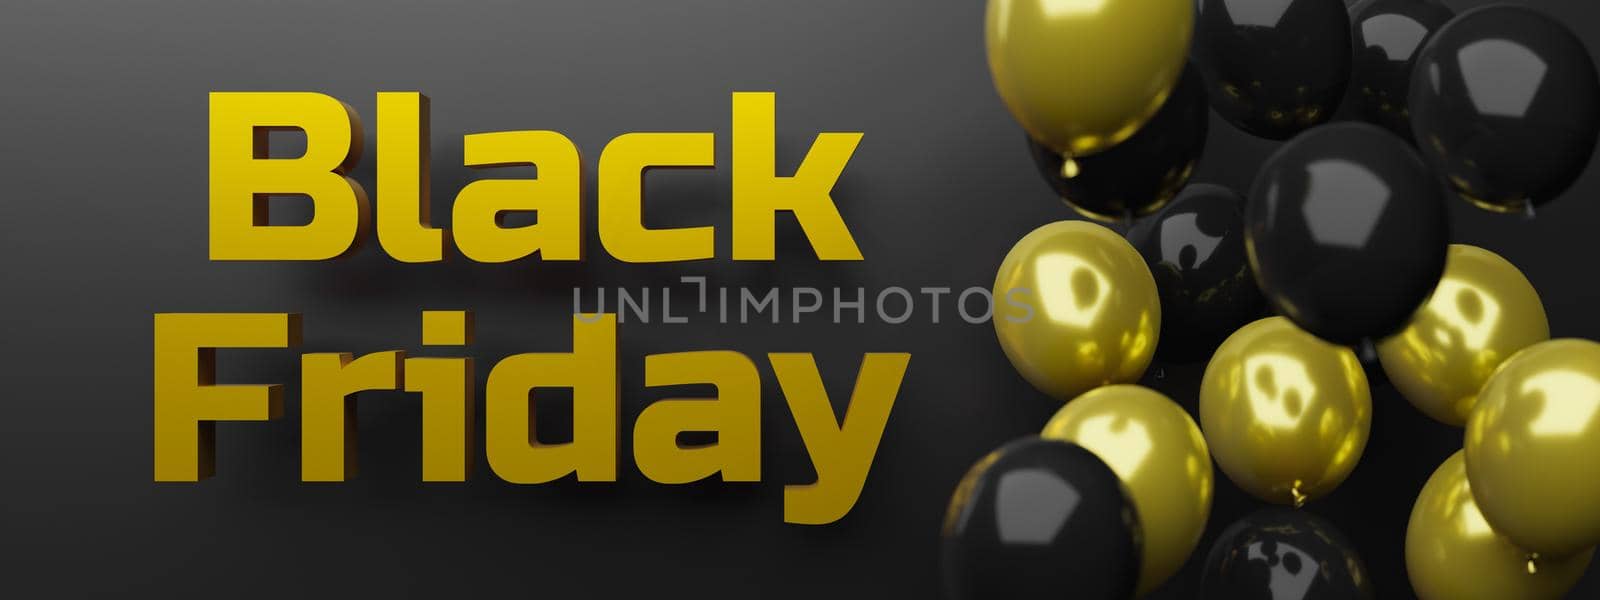 BLACK FRIDAY sign header with balloons by asolano